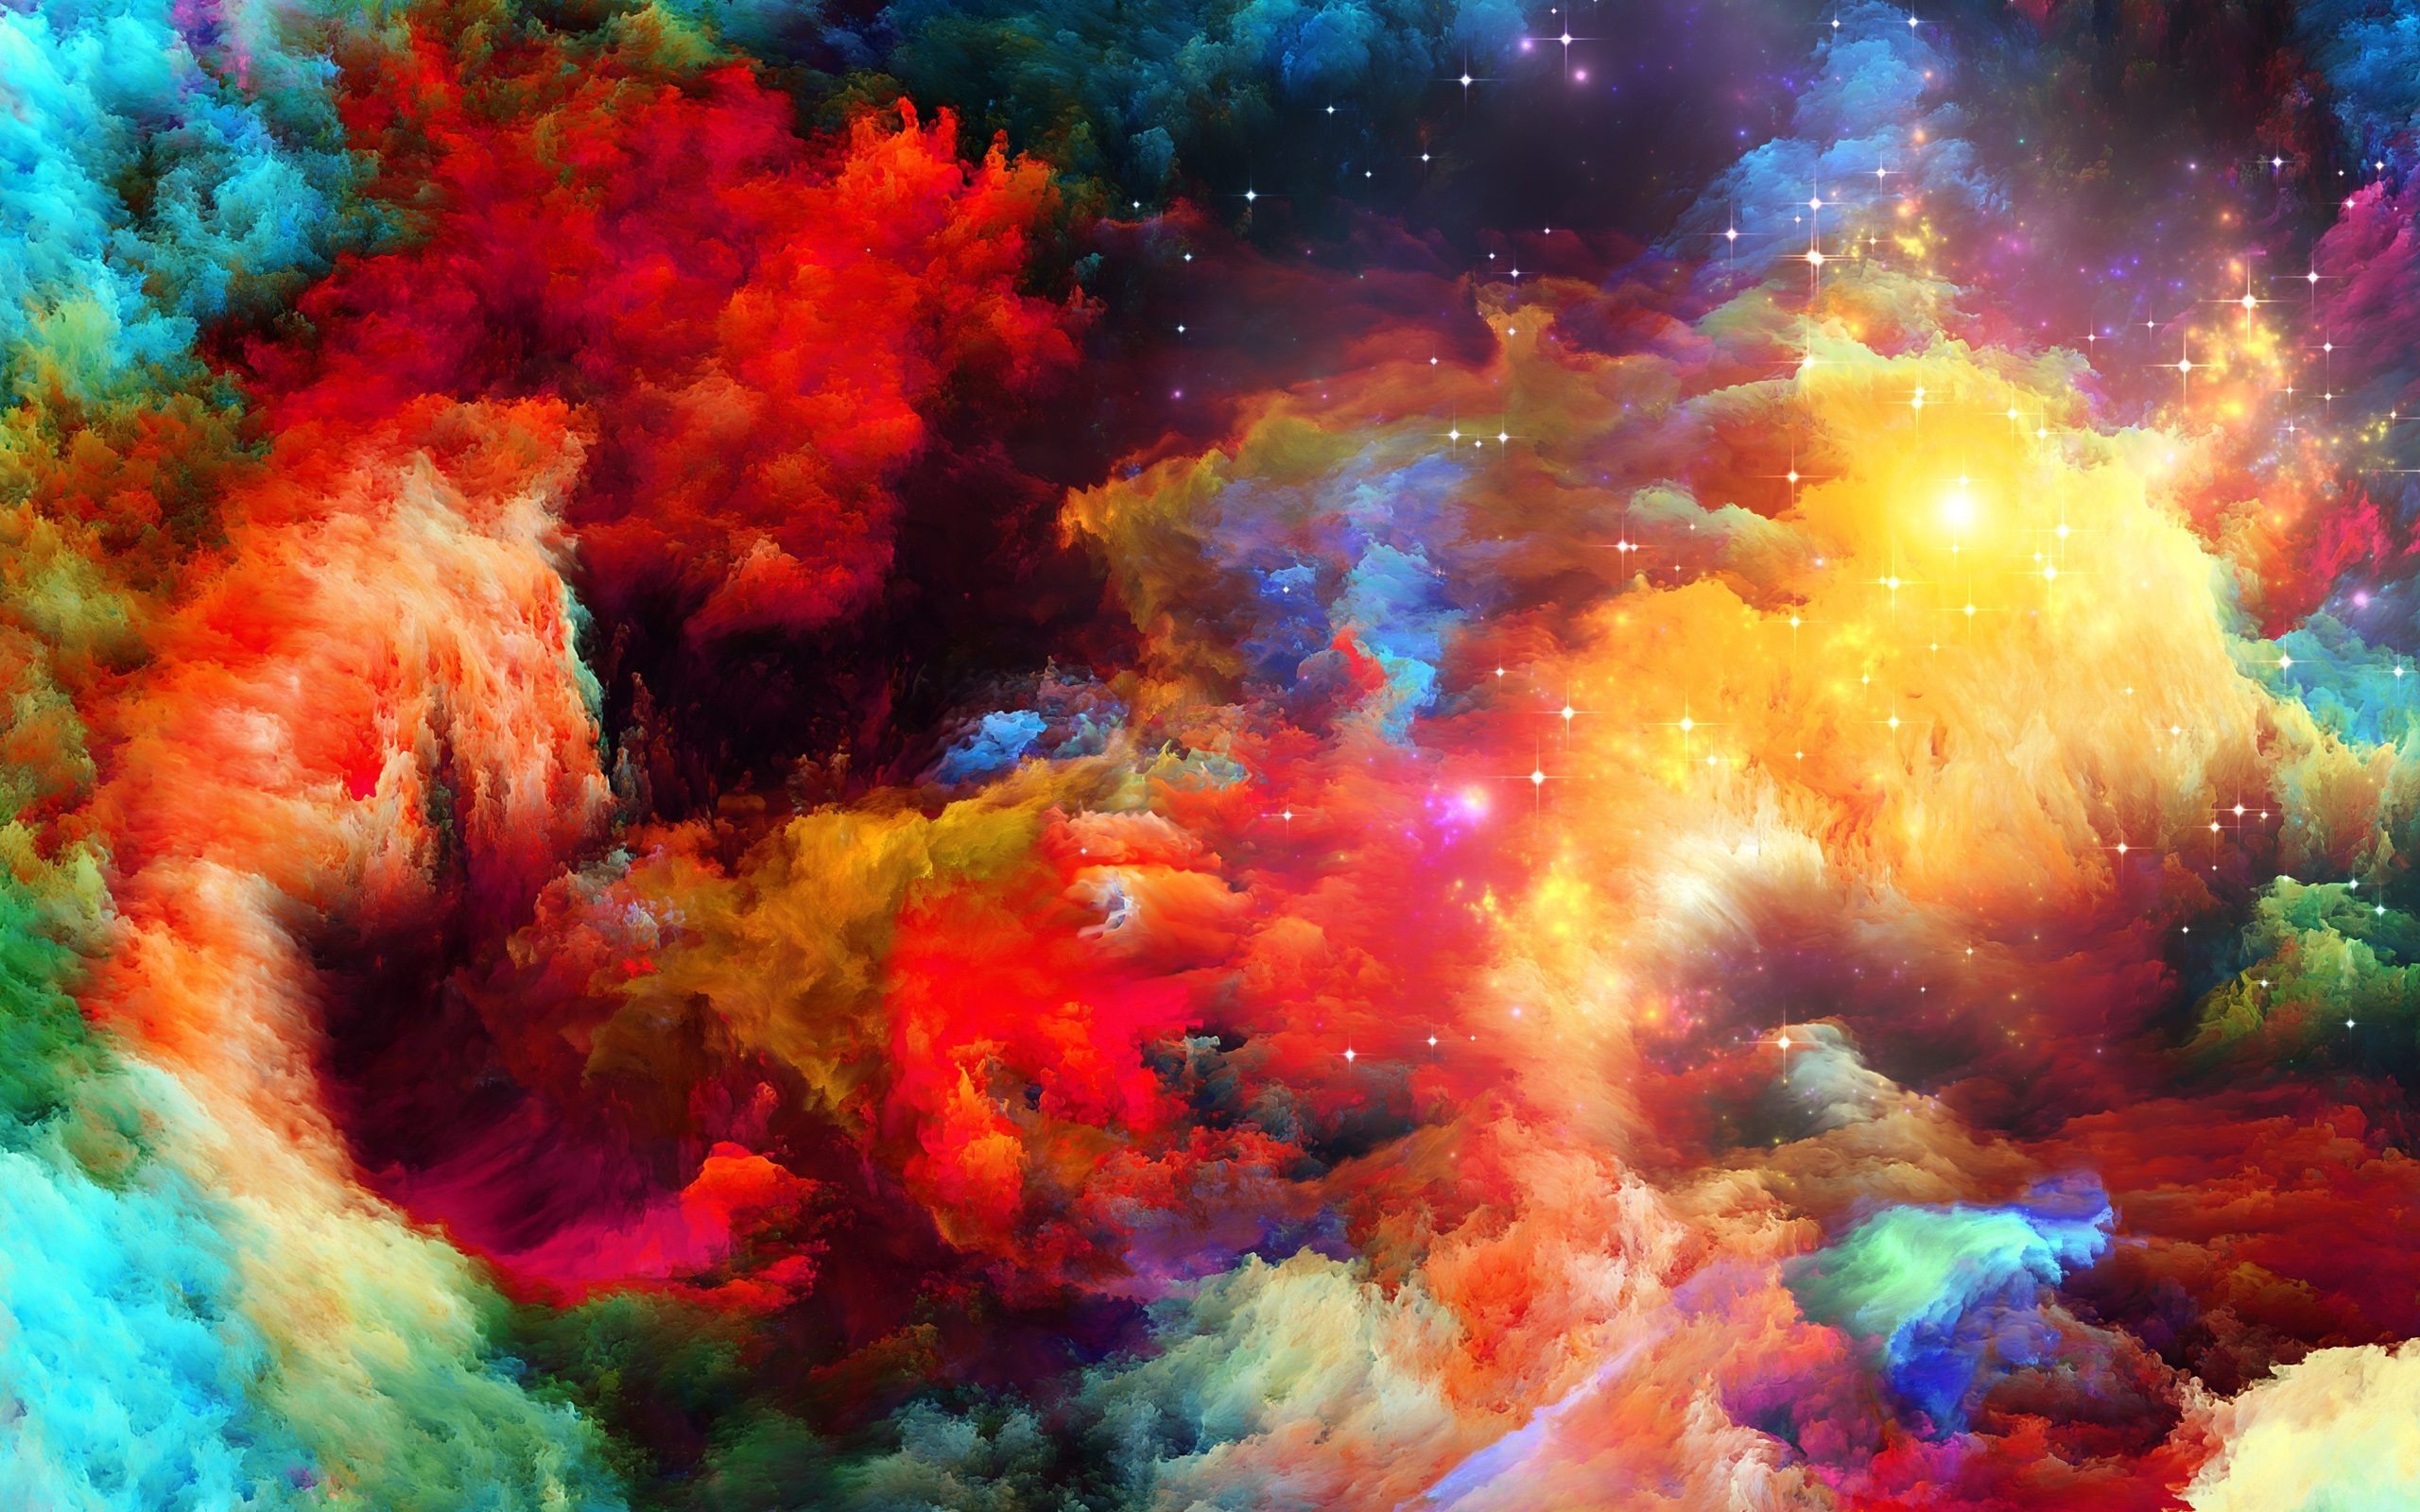 Download 2560x1600 Wallpaper Abstract Rainbow Color Explosion Dual Wide Widescreen 16 10 Widescreen 2560x1600 Hd Image Background 3097